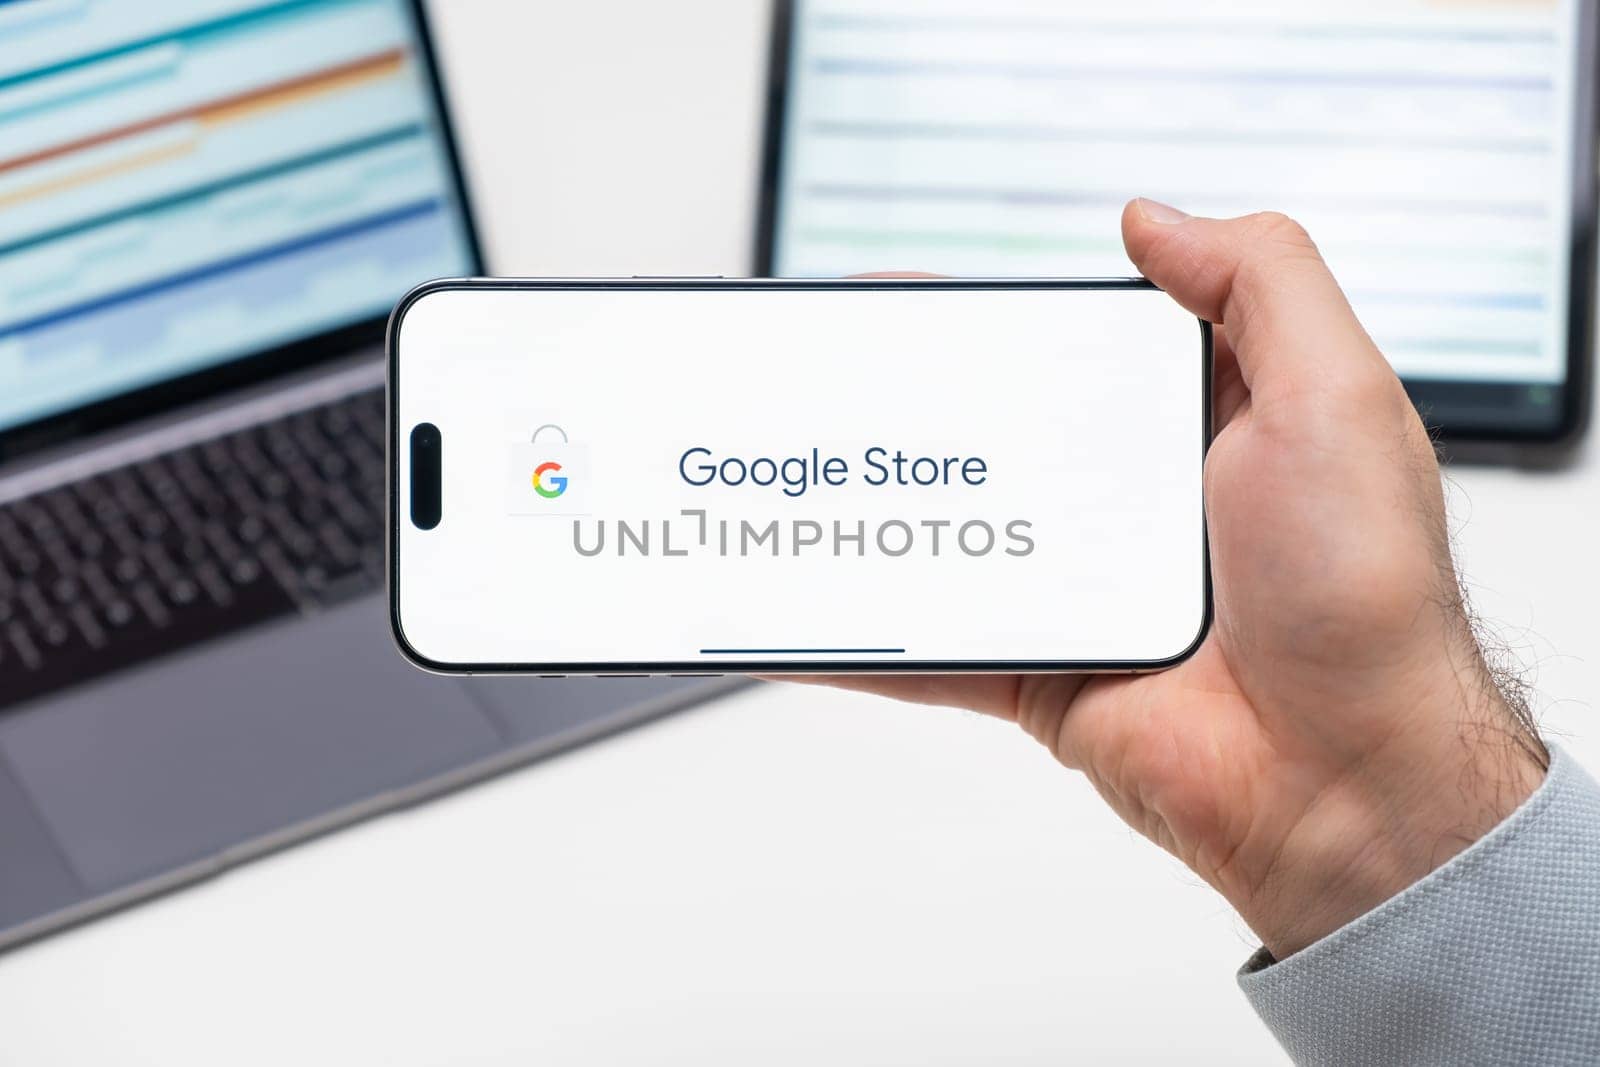 Google store logo of app on the screen of mobile phone held by man in front of the laptop and tablet by vladimka